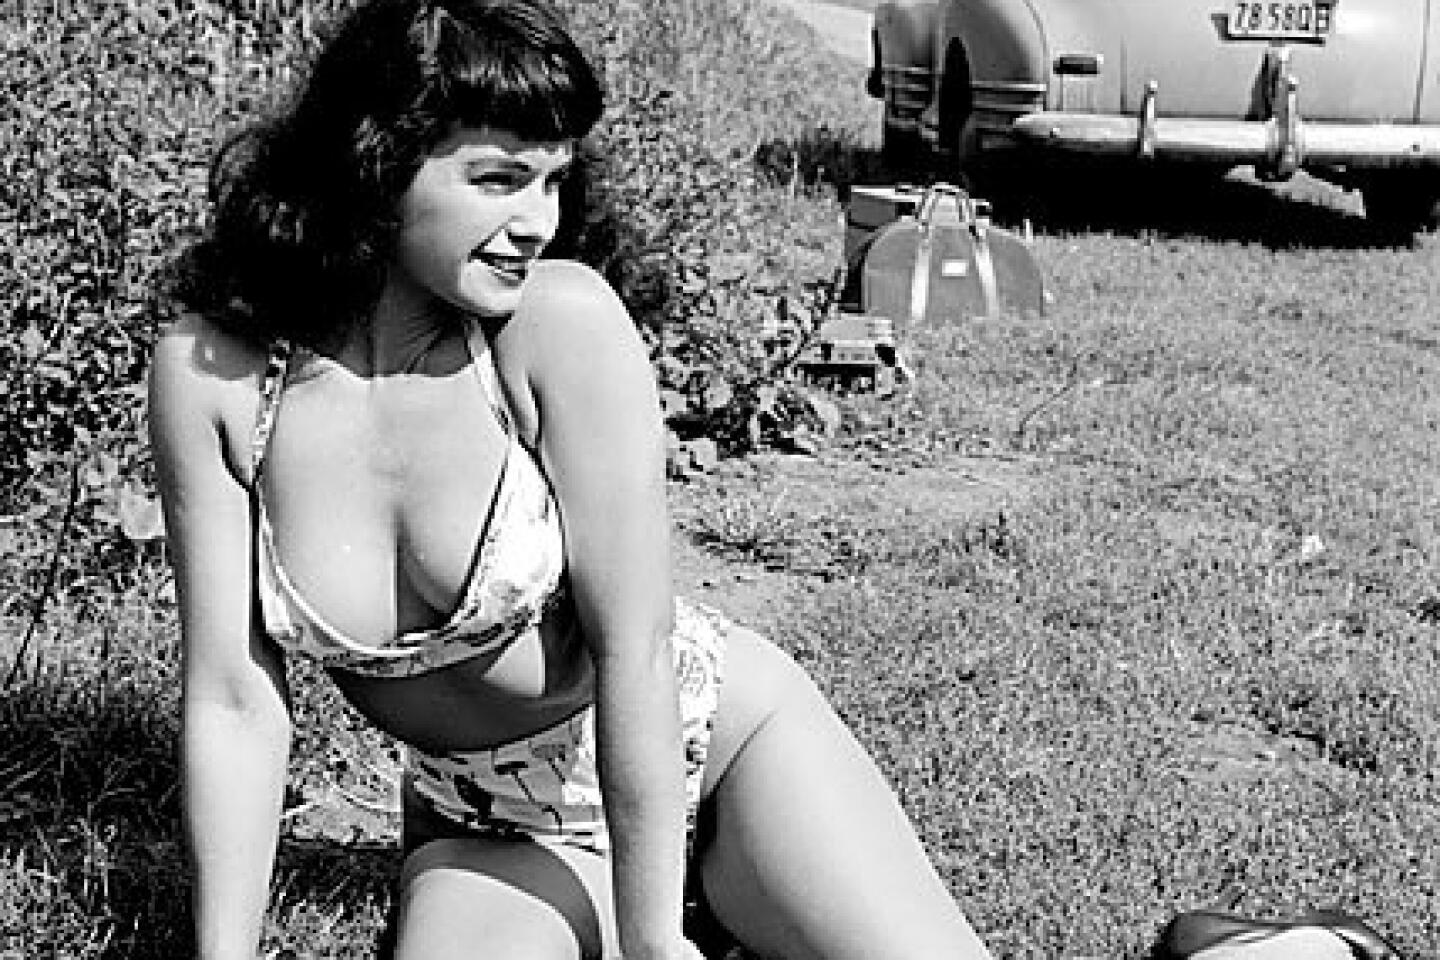 Pinup queen Bettie Page dies at 85 - Los Angeles Times